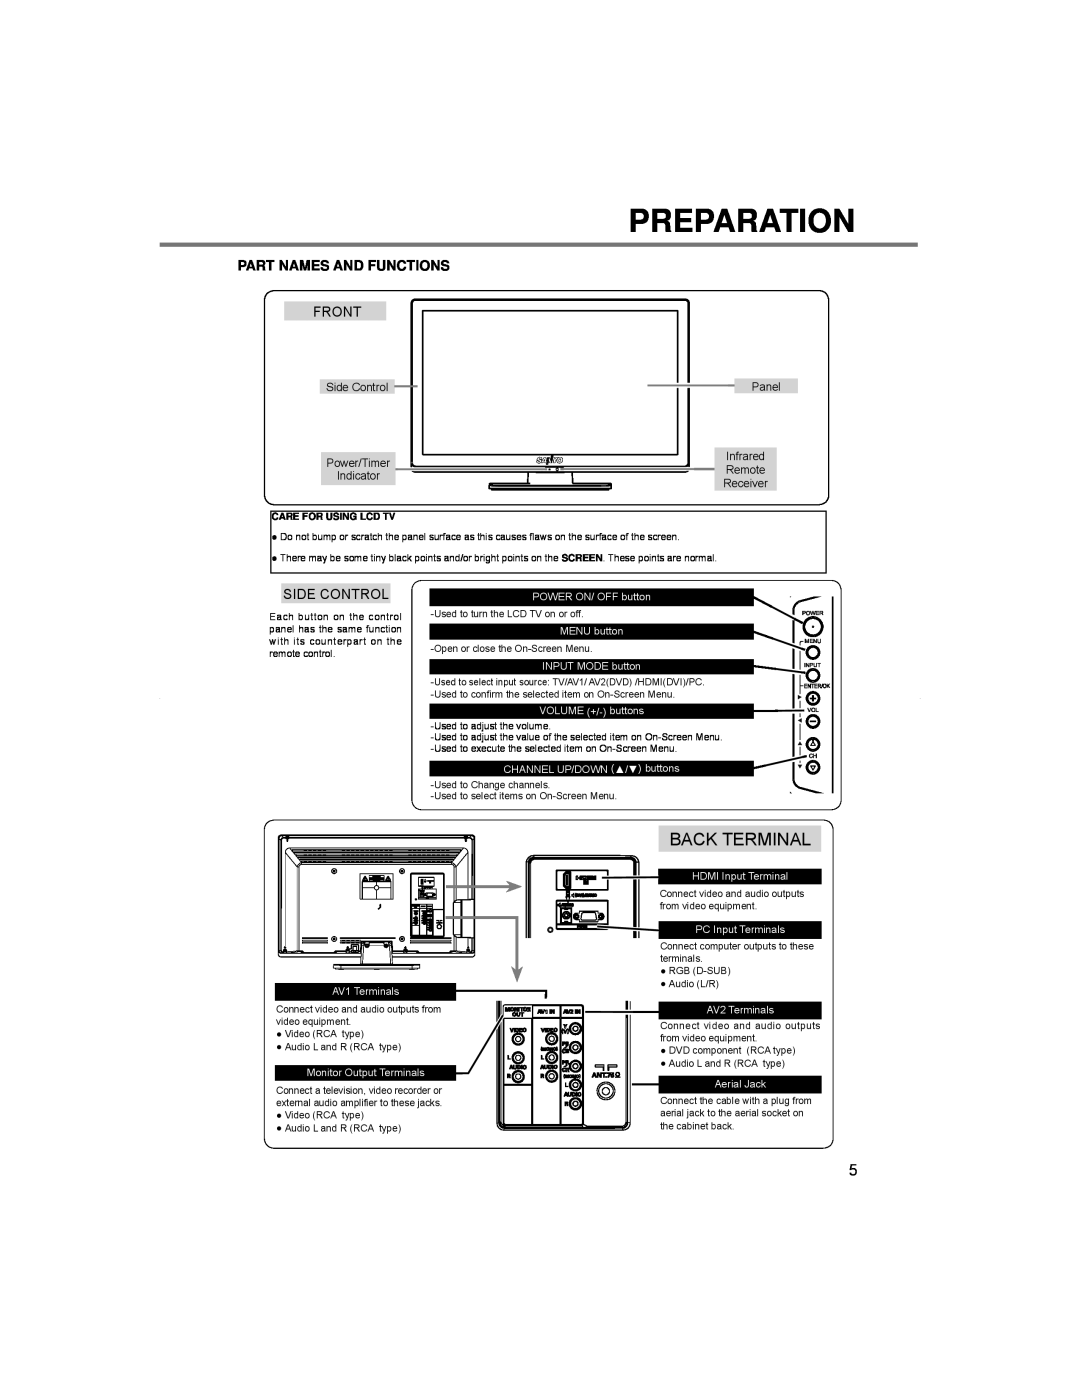 Sanyo LCE-24C100F(N), LCE-24C100F(S) Preparation, Part Names And Functions, Back Terminal, Front, Side Control 